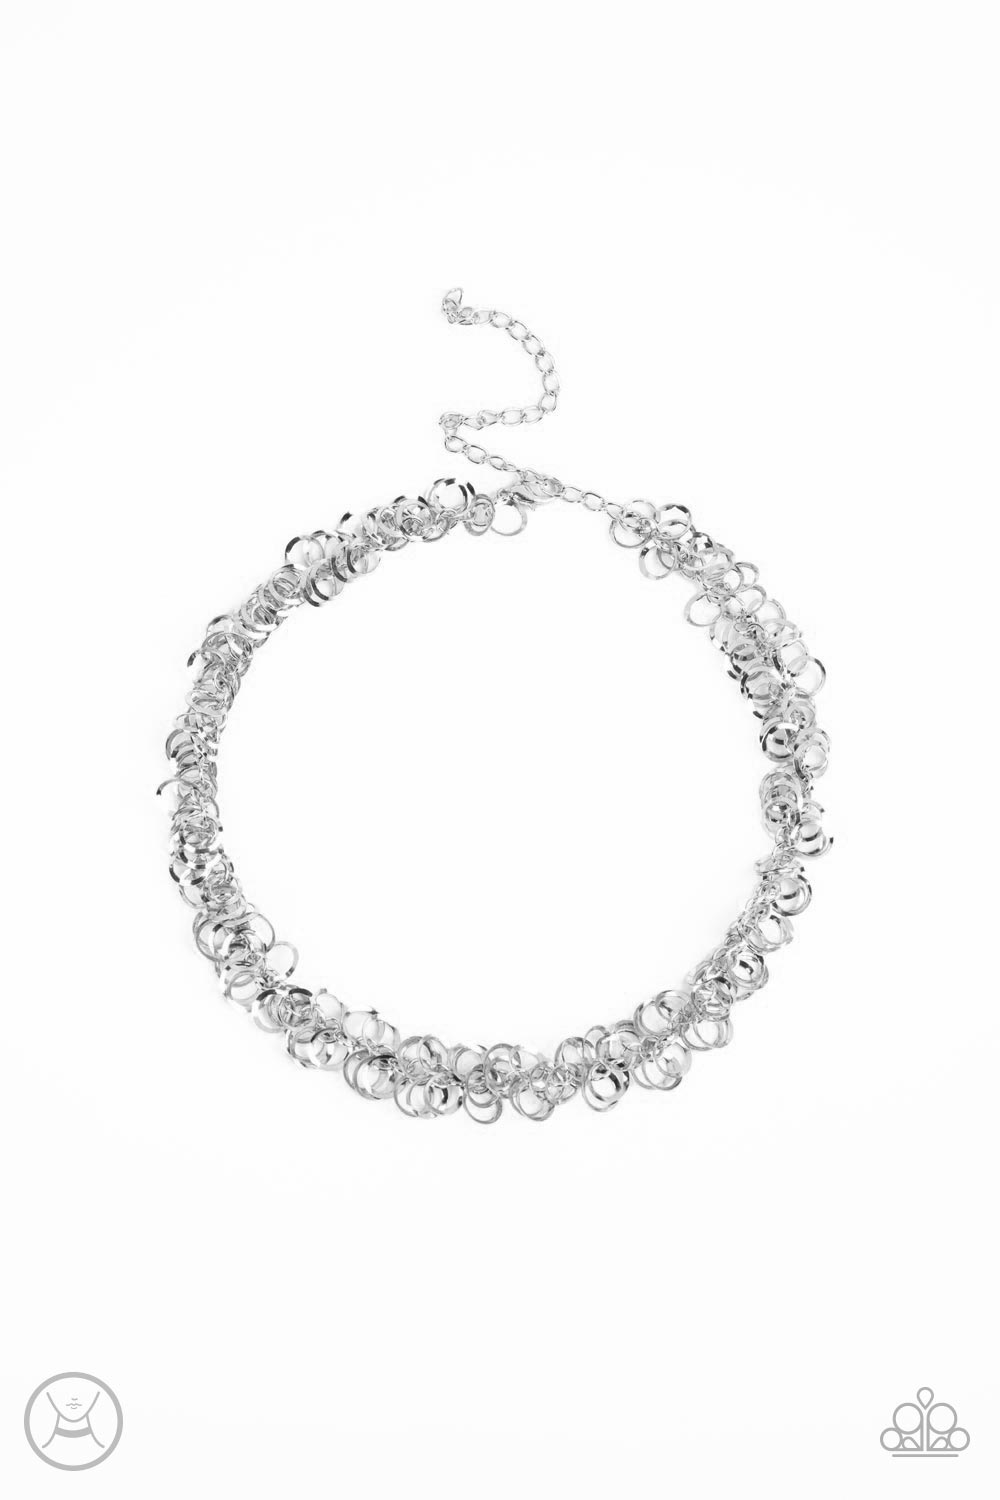 Cause a Commotion Silver Choker Necklace - Paparazzi Accessories- lightbox - CarasShop.com - $5 Jewelry by Cara Jewels